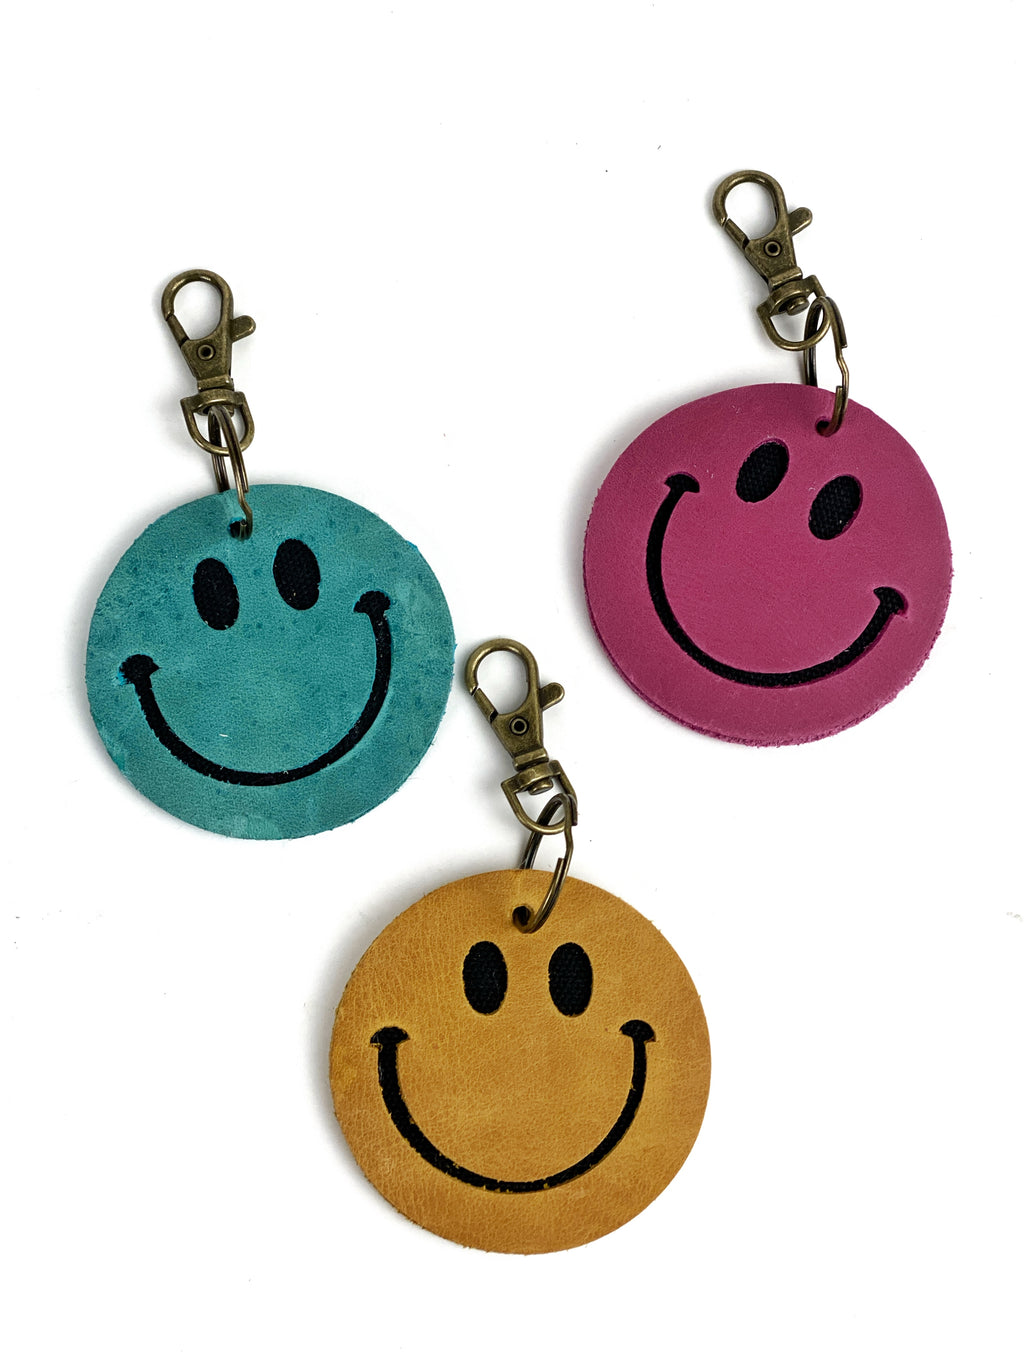 Smiley Face Key Chain for Purse Charm, Car, Truck, Motorcycle, Bicycle, ATV, Snowmobile, Camping, Hiking